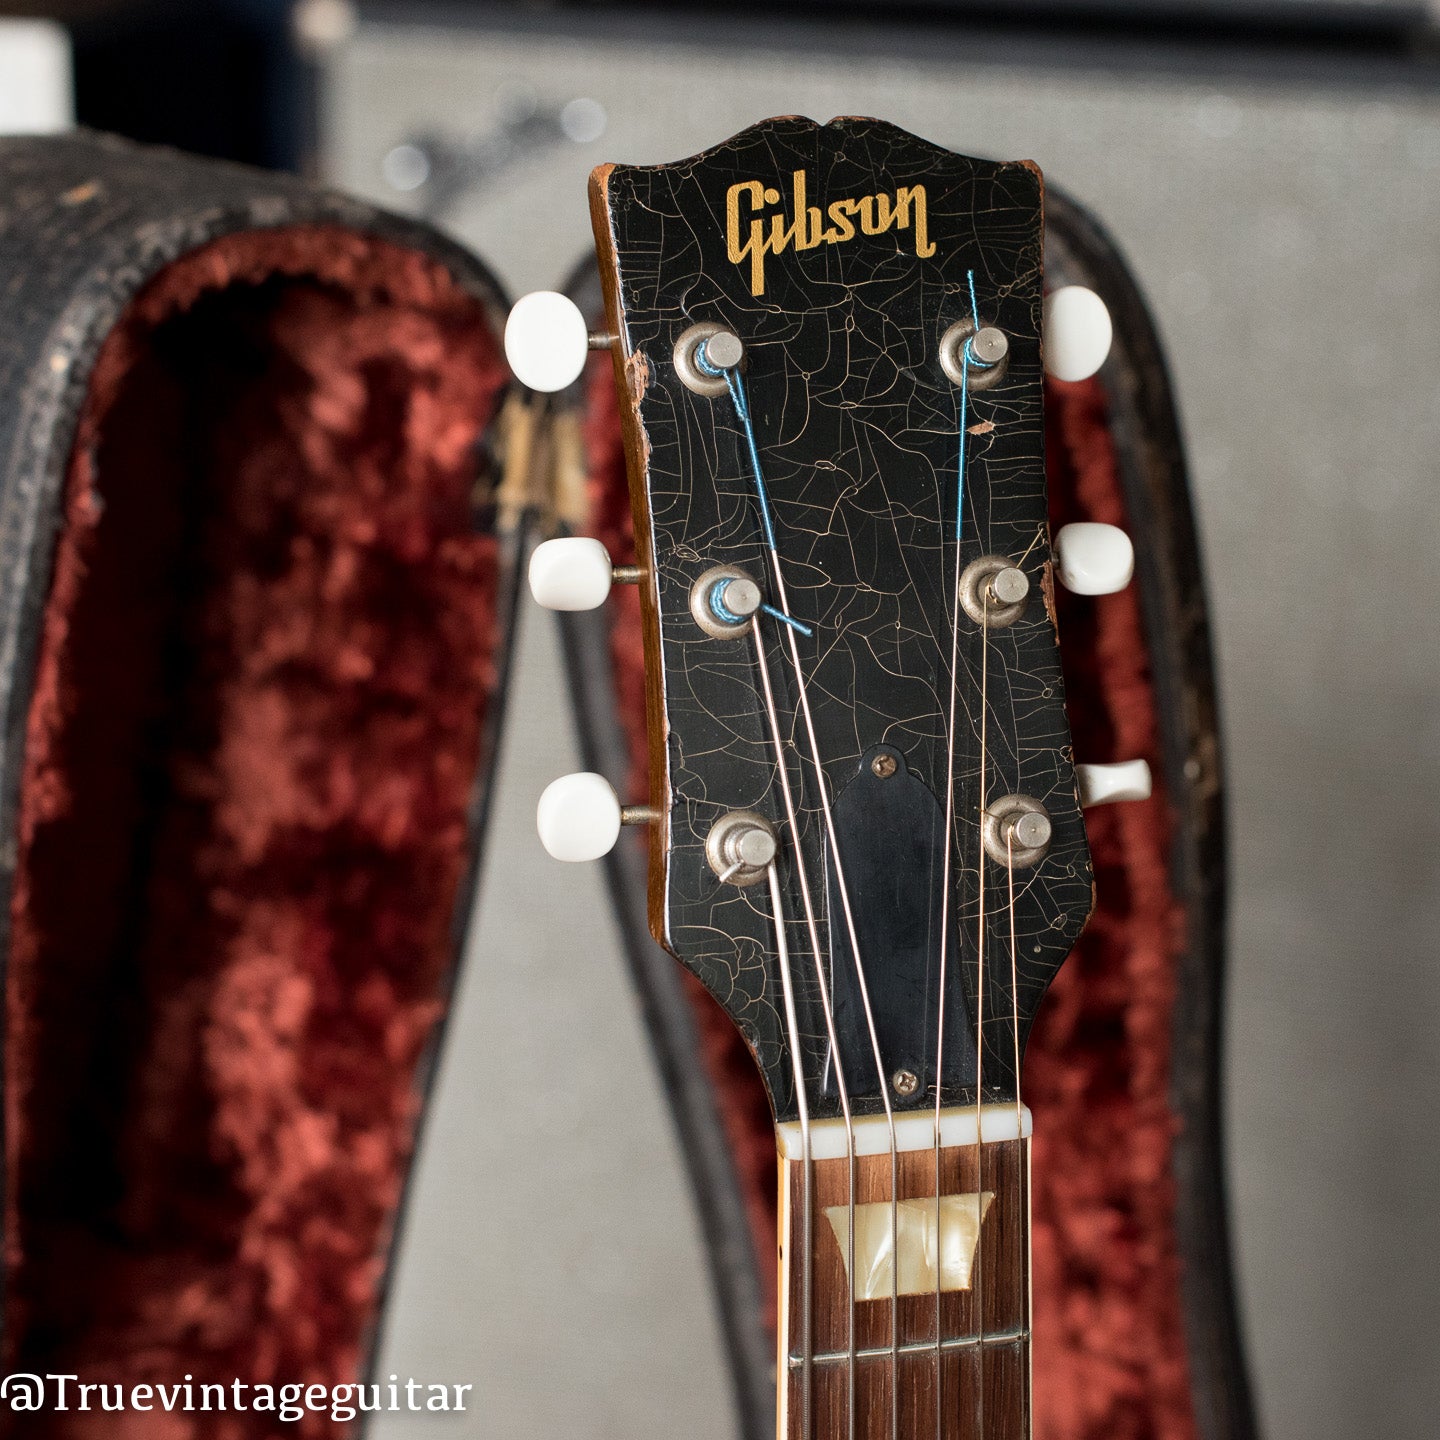 Gibson guitar headstock with finish checking 1950s